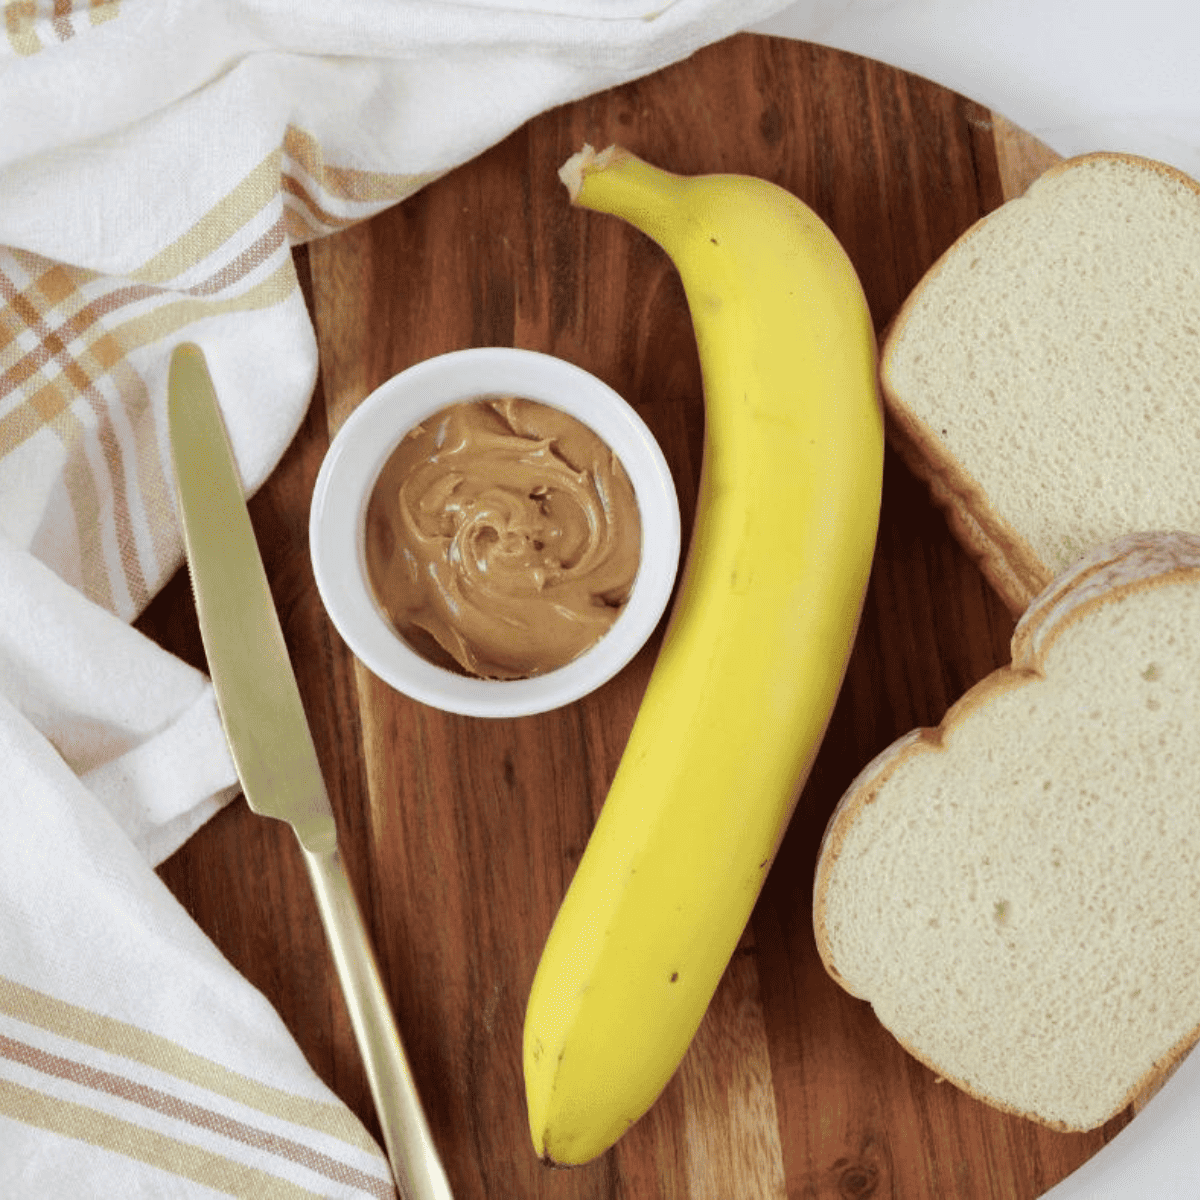 Indulge in a delightful treat with this quick and easy recipe for an Air Fryer Peanut Butter Banana Sandwich. In just a matter of minutes, you can enjoy a warm and crispy sandwich filled with creamy peanut butter, sweet ripe bananas, and optional drizzles of honey and cinnamon.